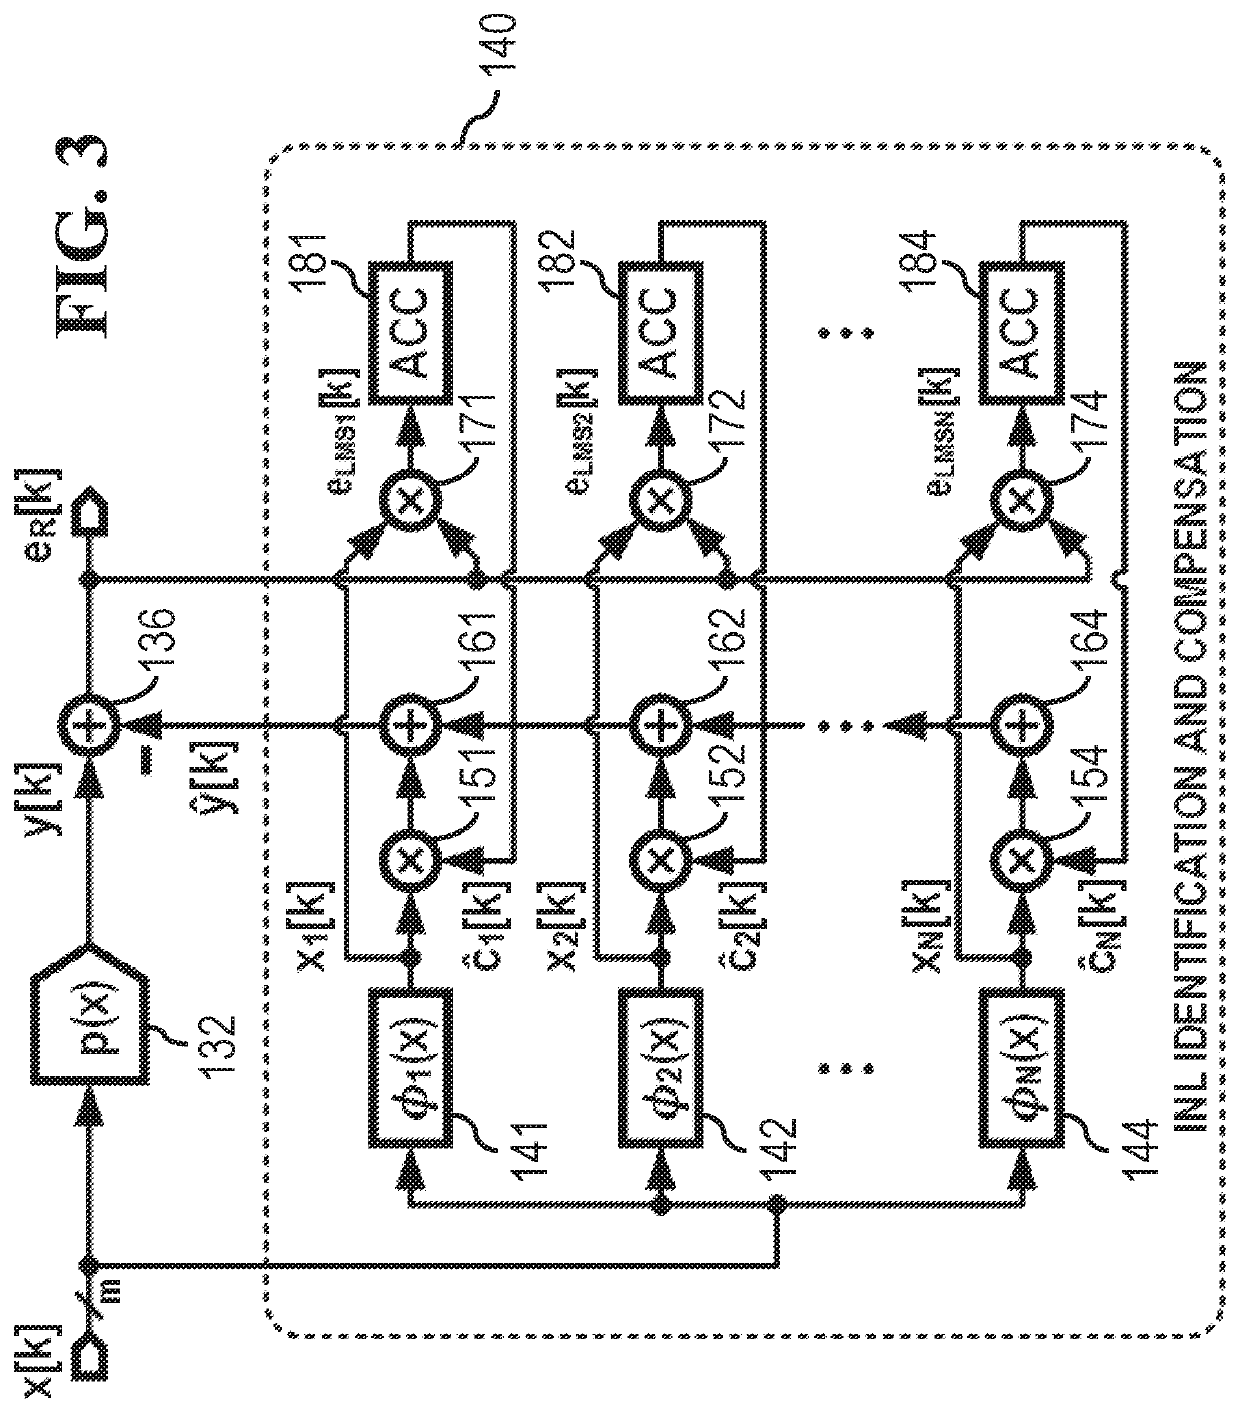 Adaptive non-linearity identification and compensation using orthogonal functions in a mixed signal circuit